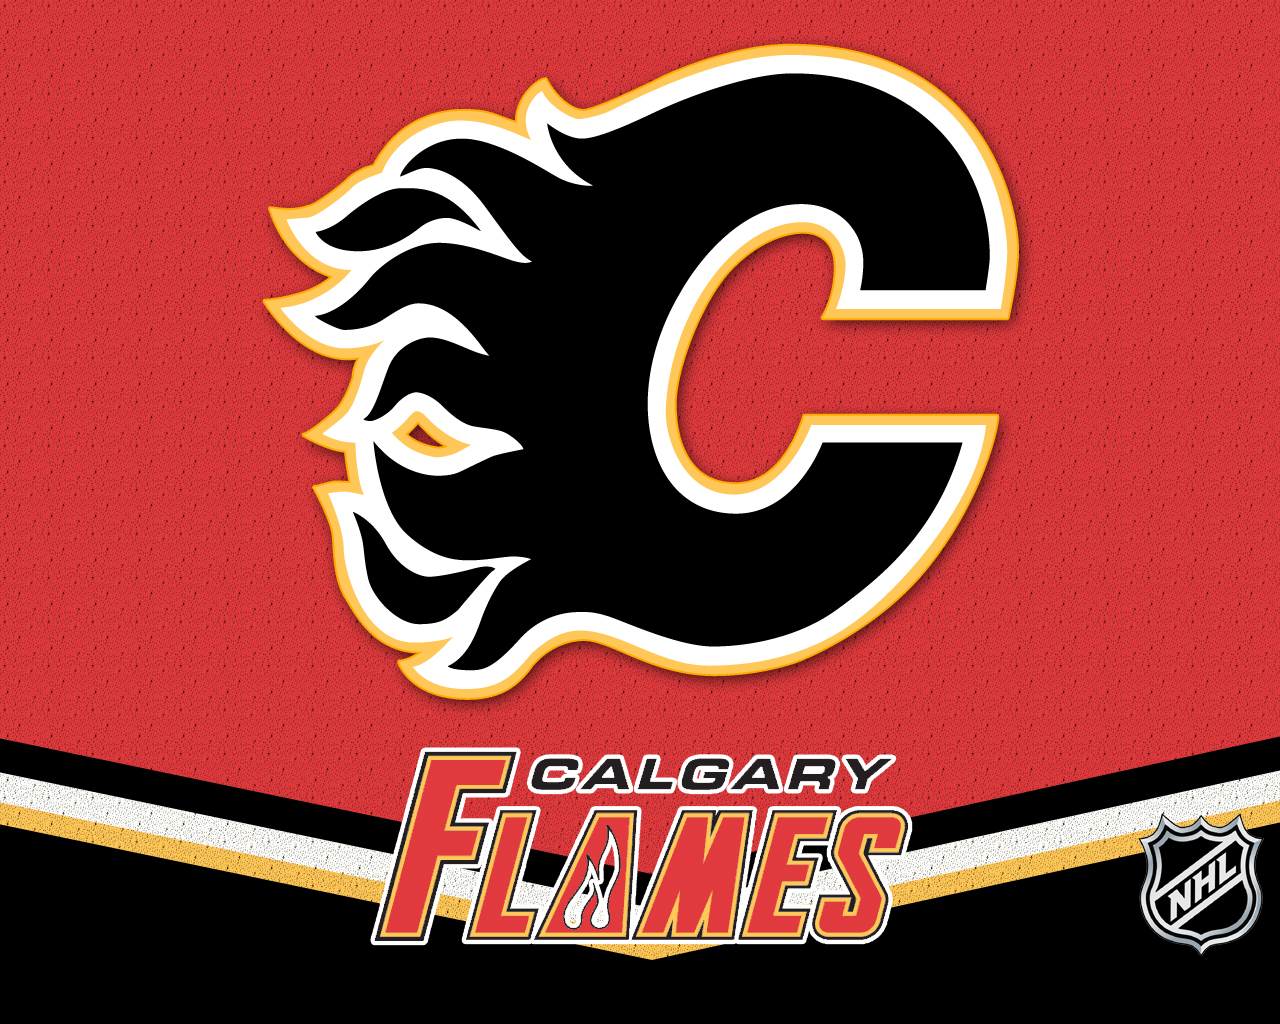 200+] Calgary Flames Background s